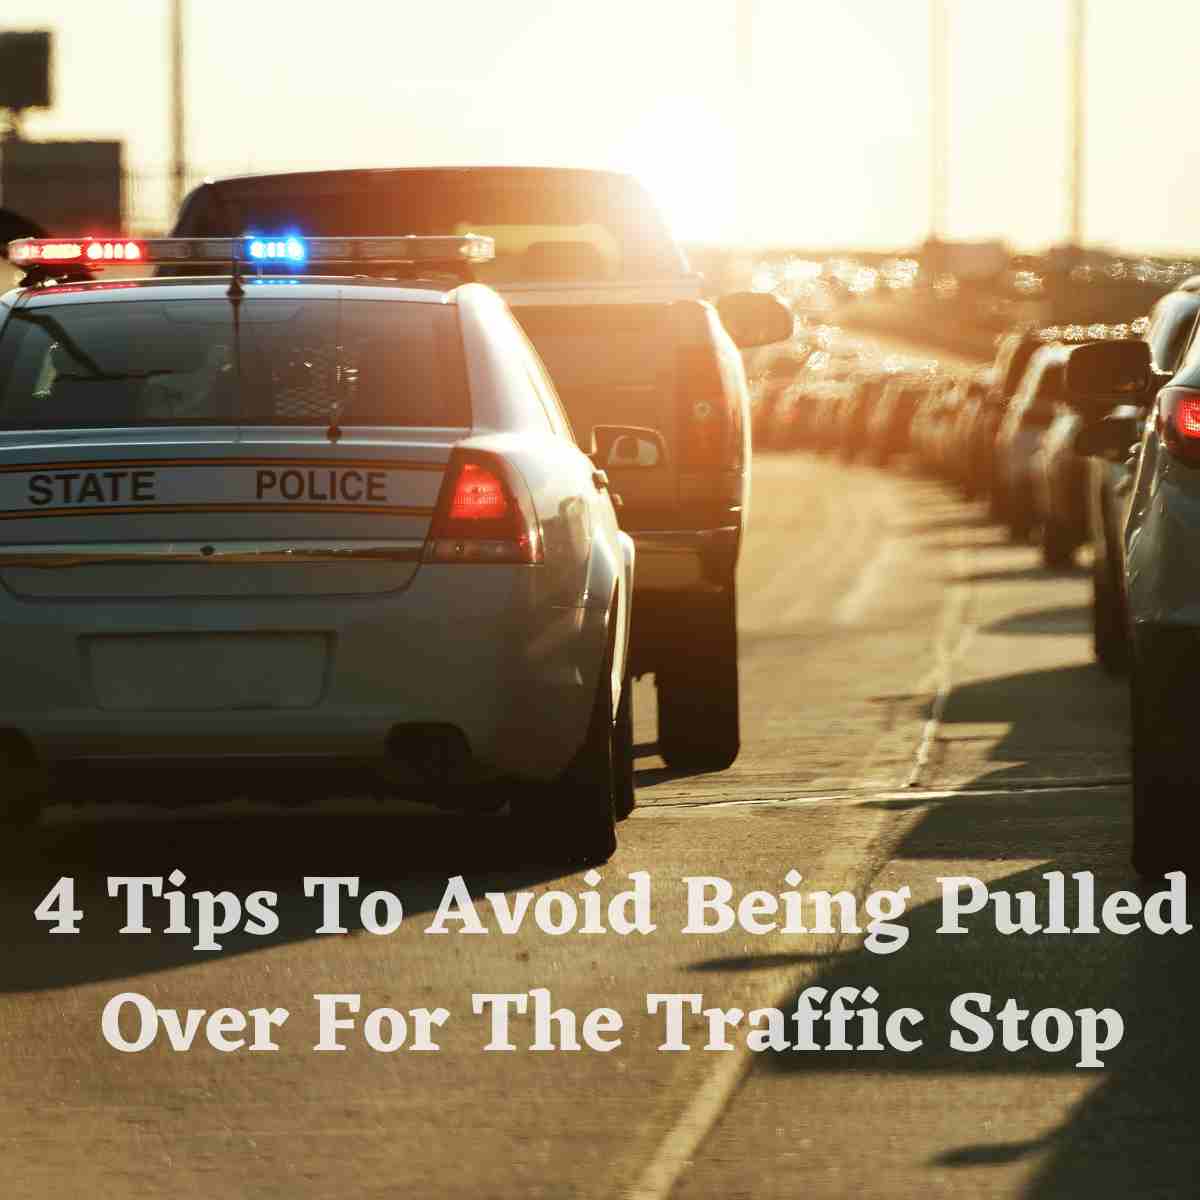 Tips To Avoid Being Pulled Over For The Traffic Stop